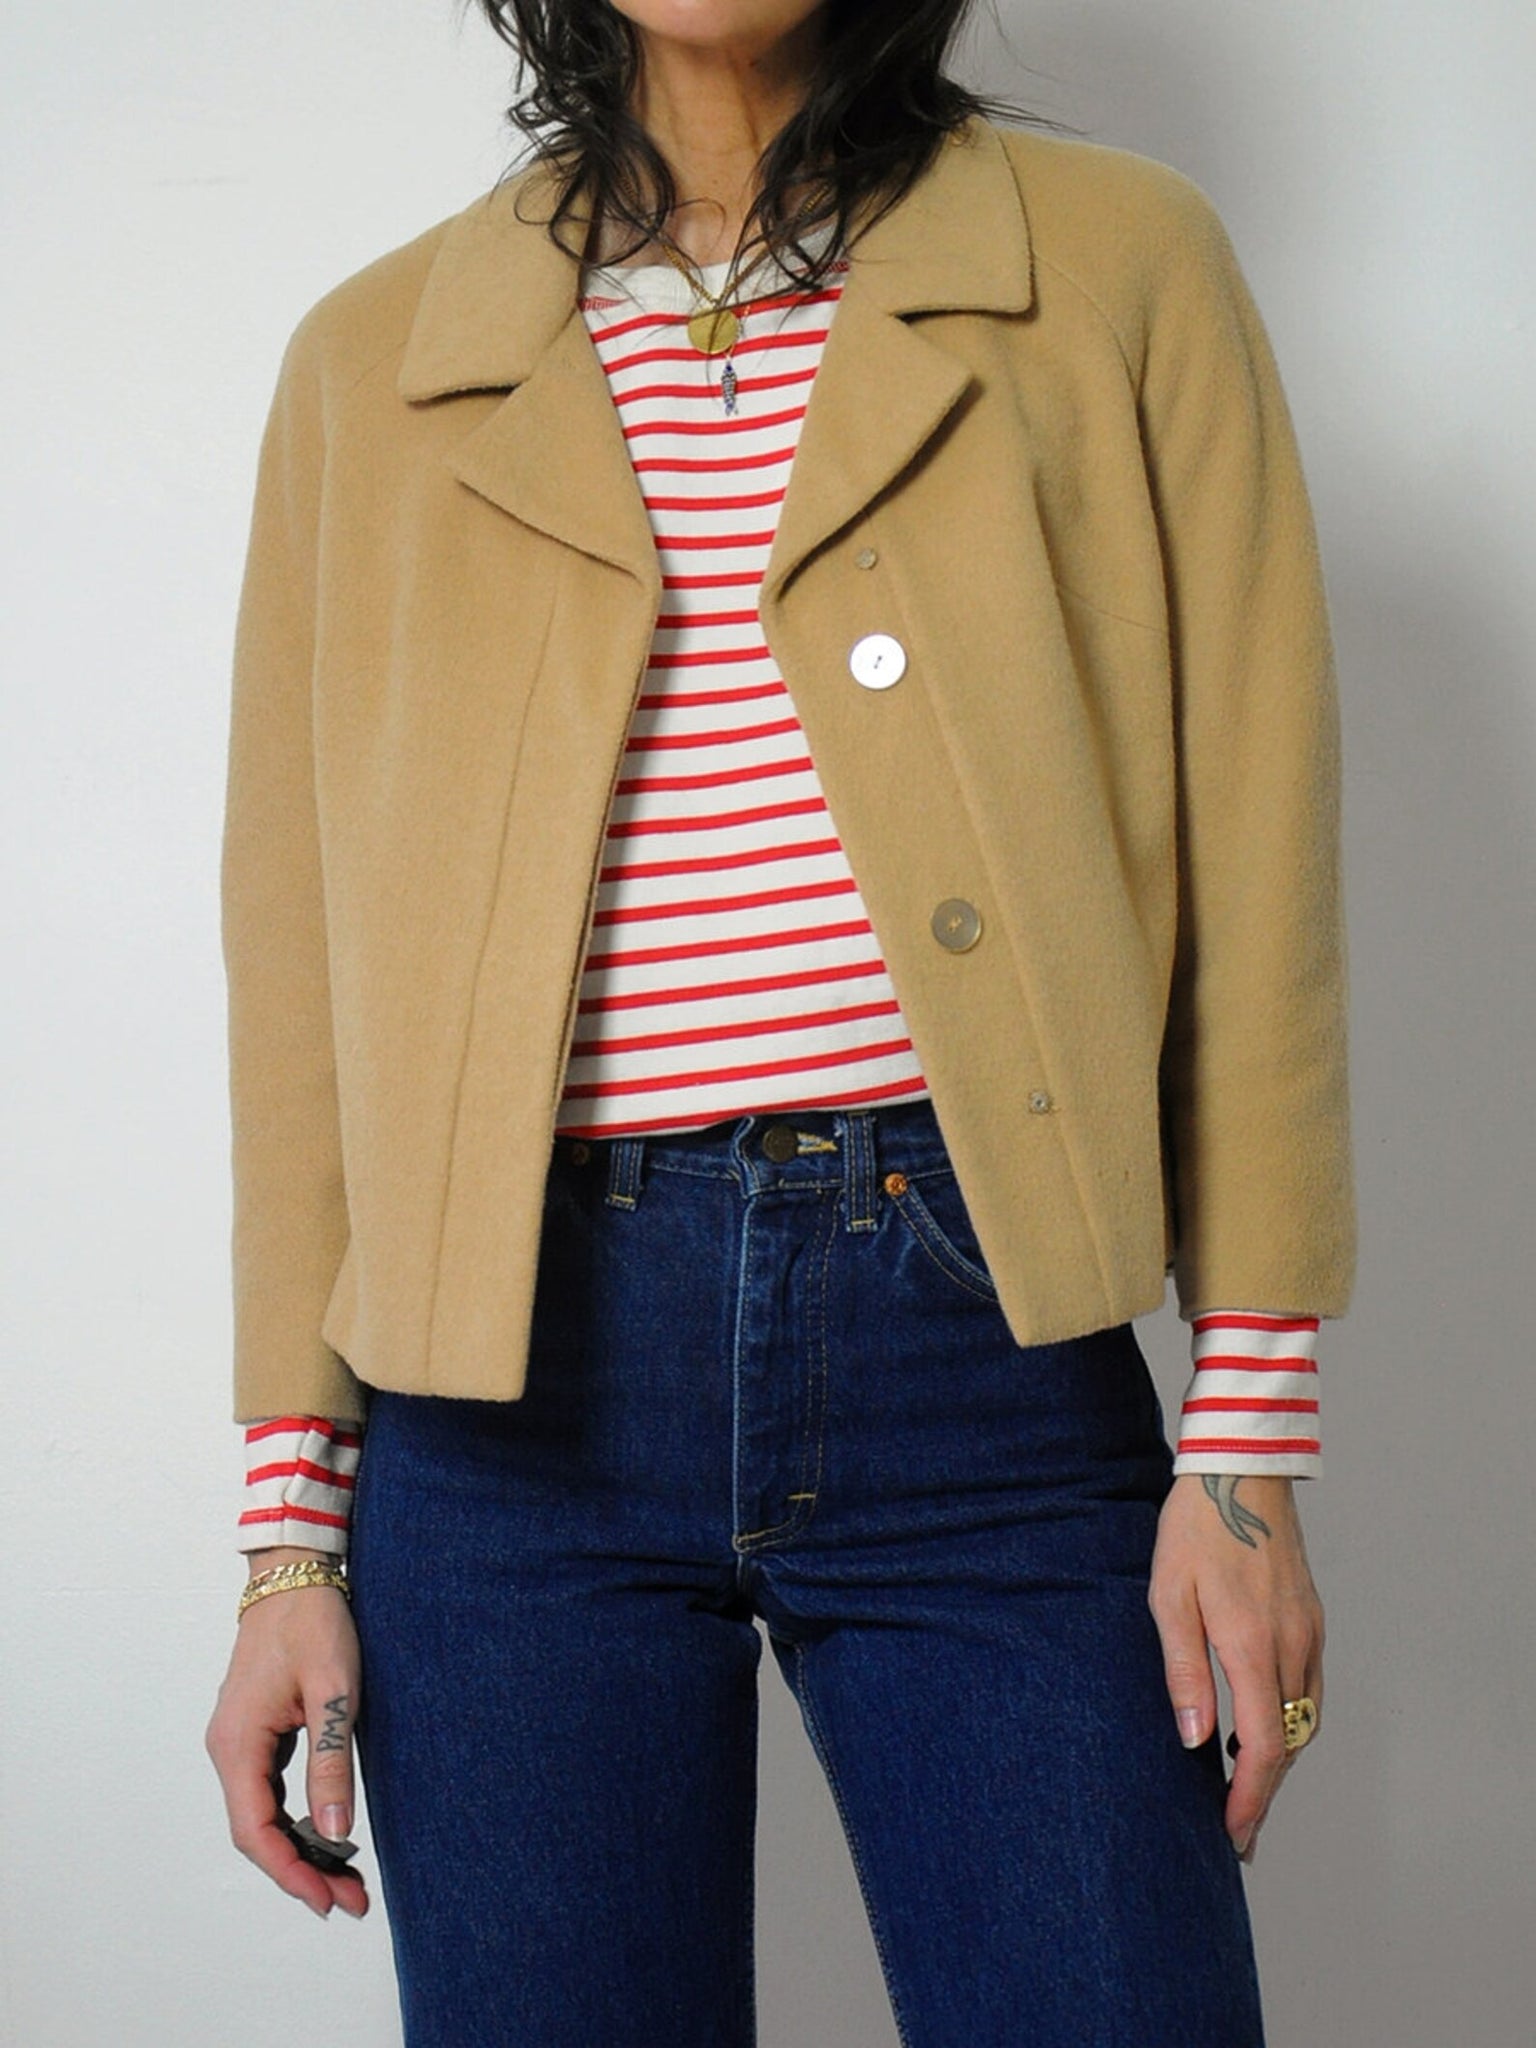 1960's Camel Hair Cropped Jacket